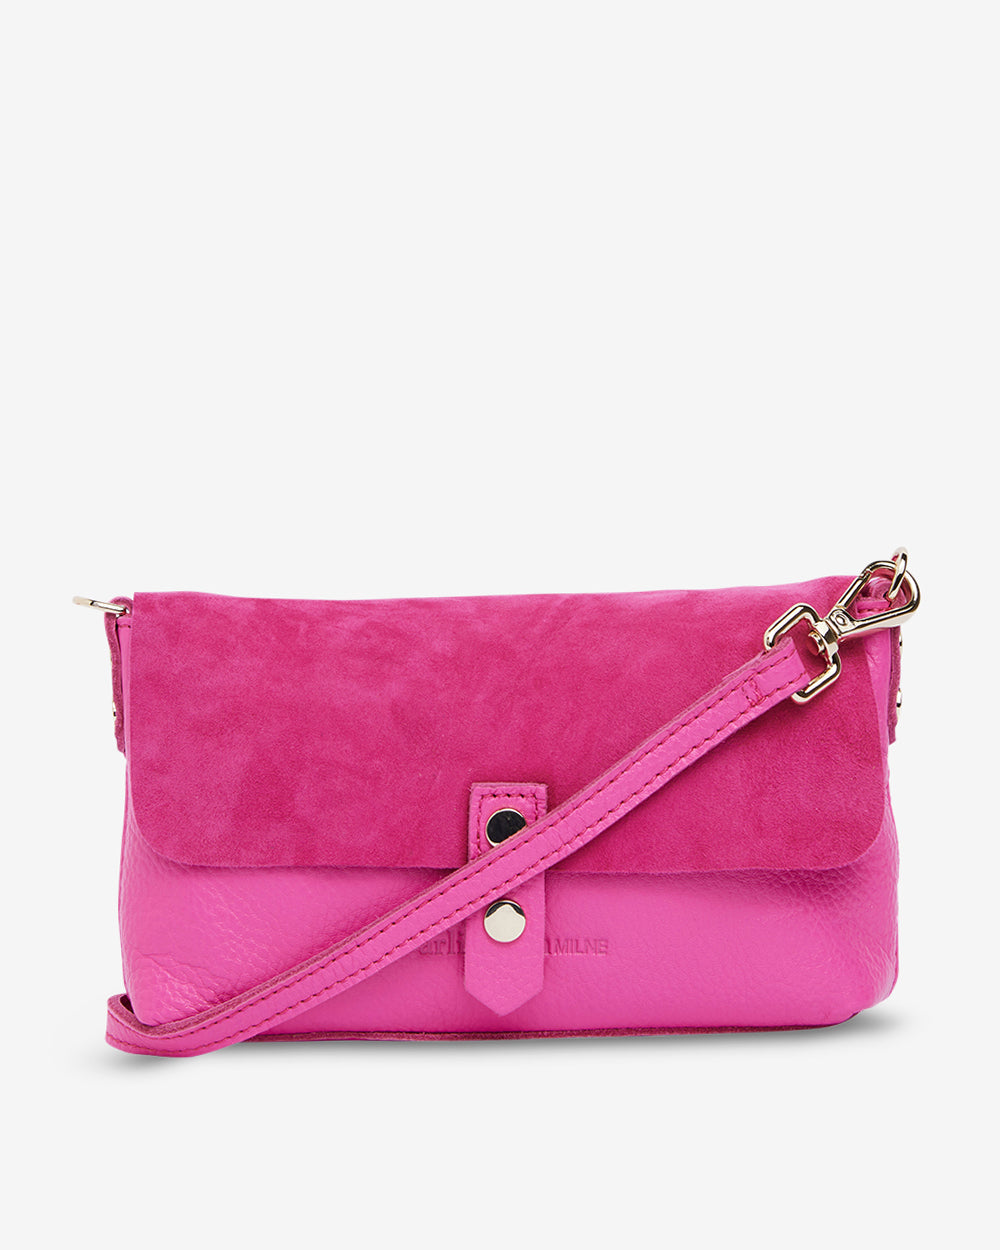 Paige Wallet - Pink